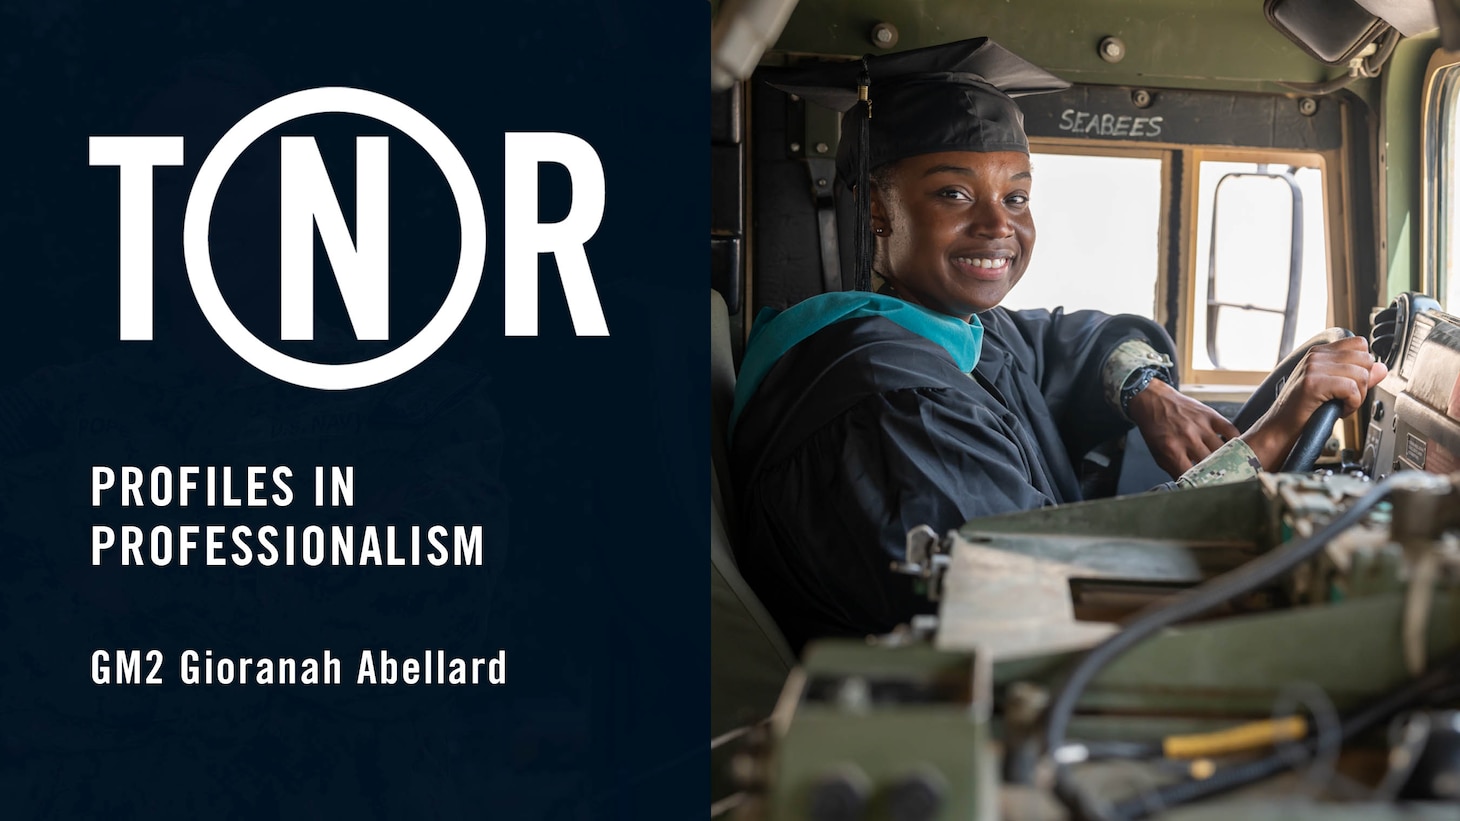 Arriving at Naval Station Newport Rhode Island November 11, 2016, Gunner’s Mate 2nd Class Gioranah Abellard, a Navy Reserve Sailor from Brockton, Massachusetts, came with two goals in mind: step outside of her comfort zone and advance her professional career.